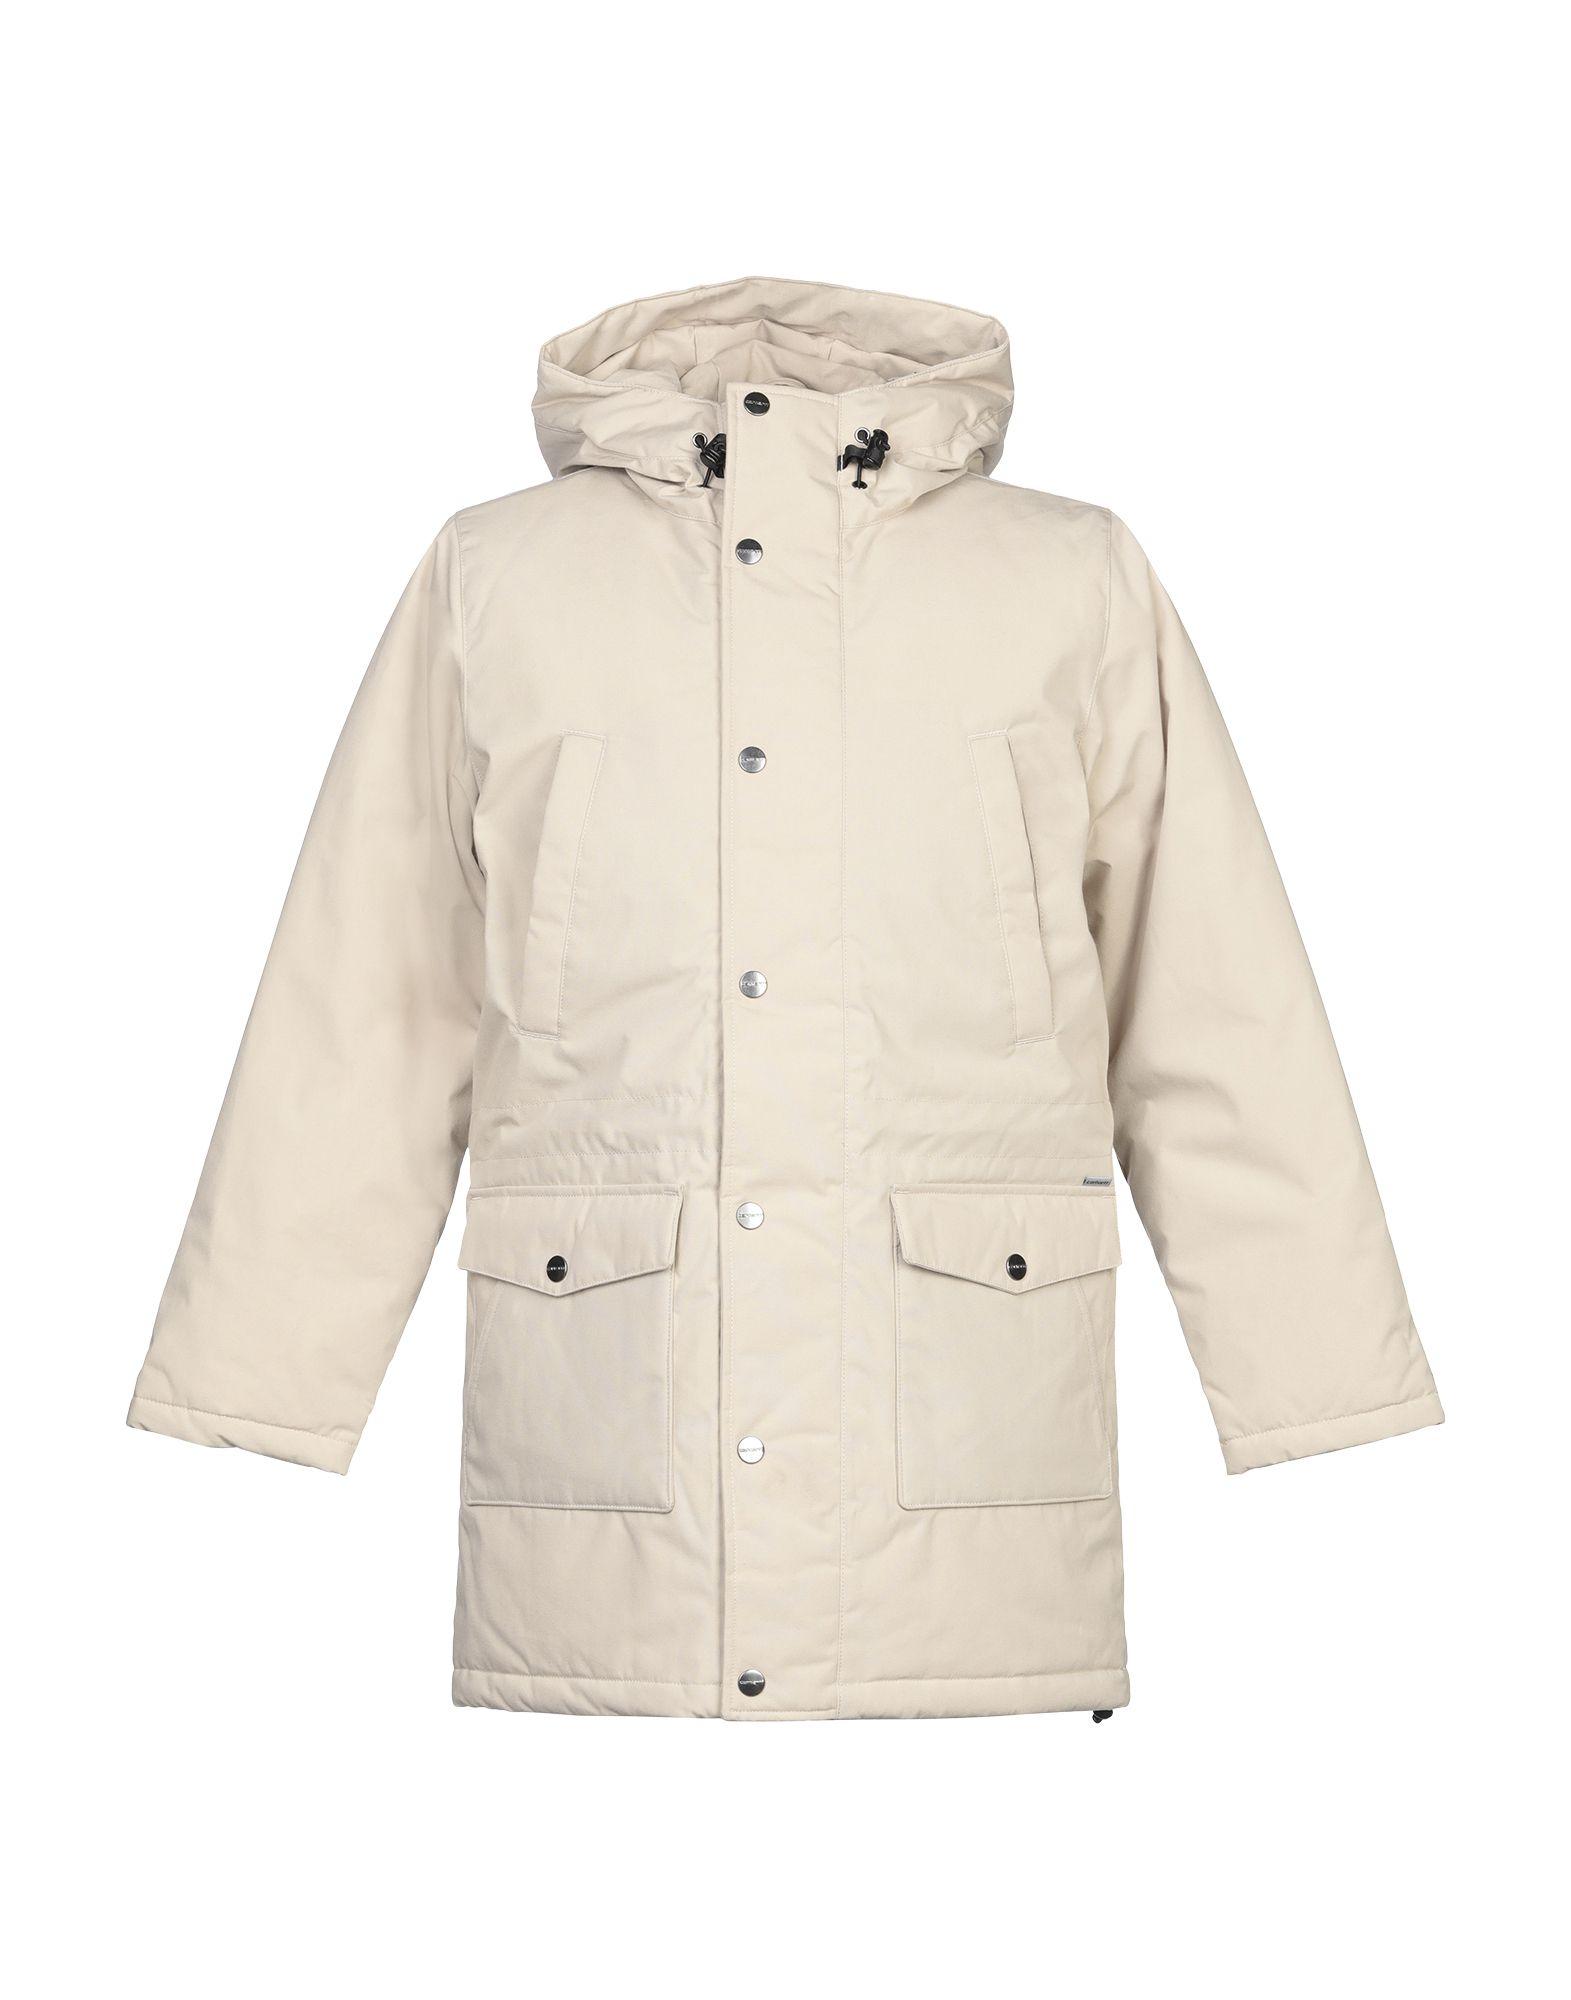 Carhartt Synthetic Jacket in Beige (Natural) for Men - Save 7% - Lyst